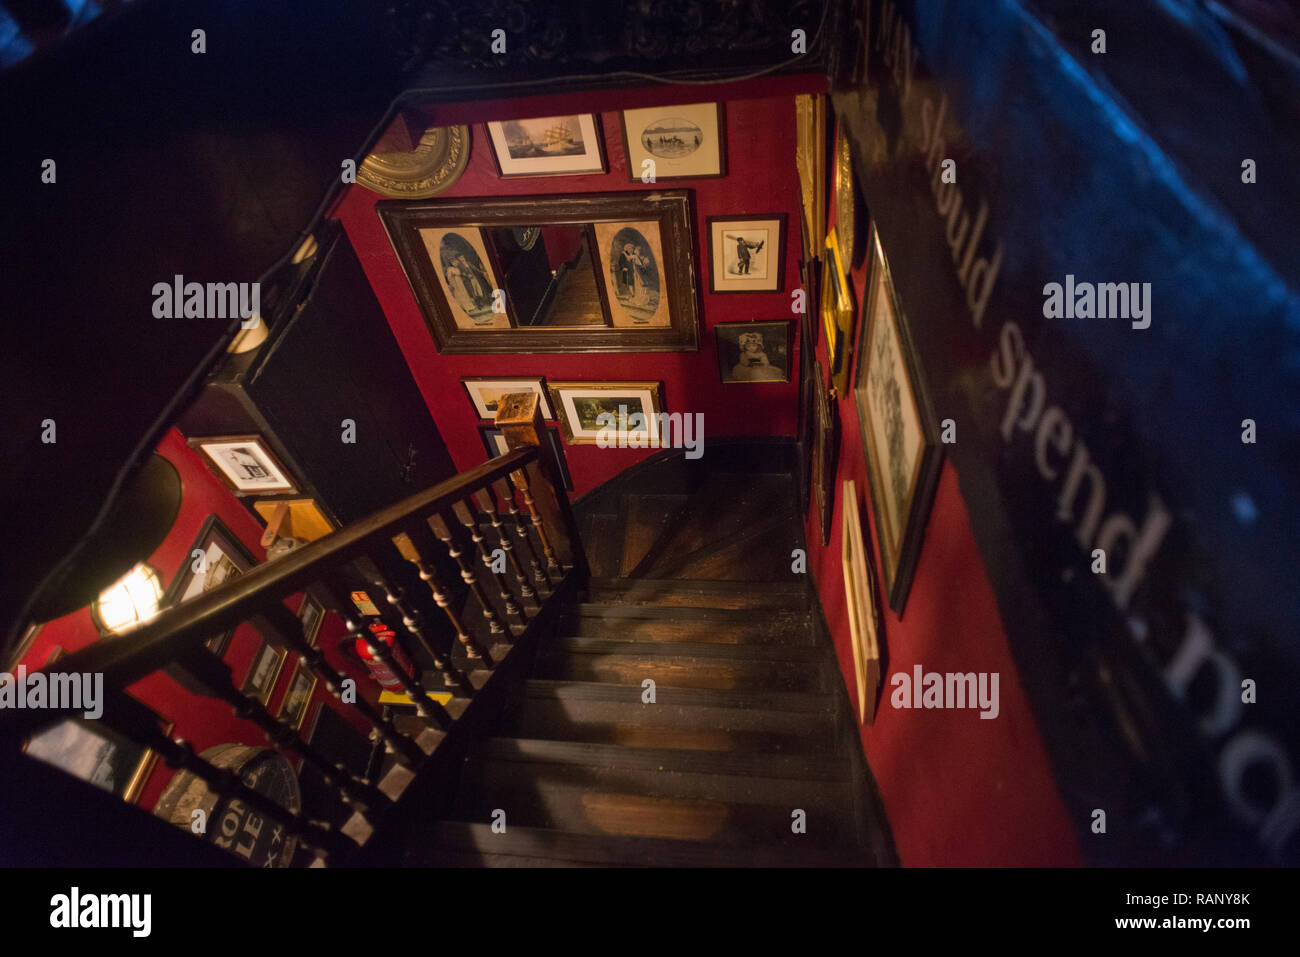 Interior view of the Mayflower pub, Rotherhithe, London Stock Photo